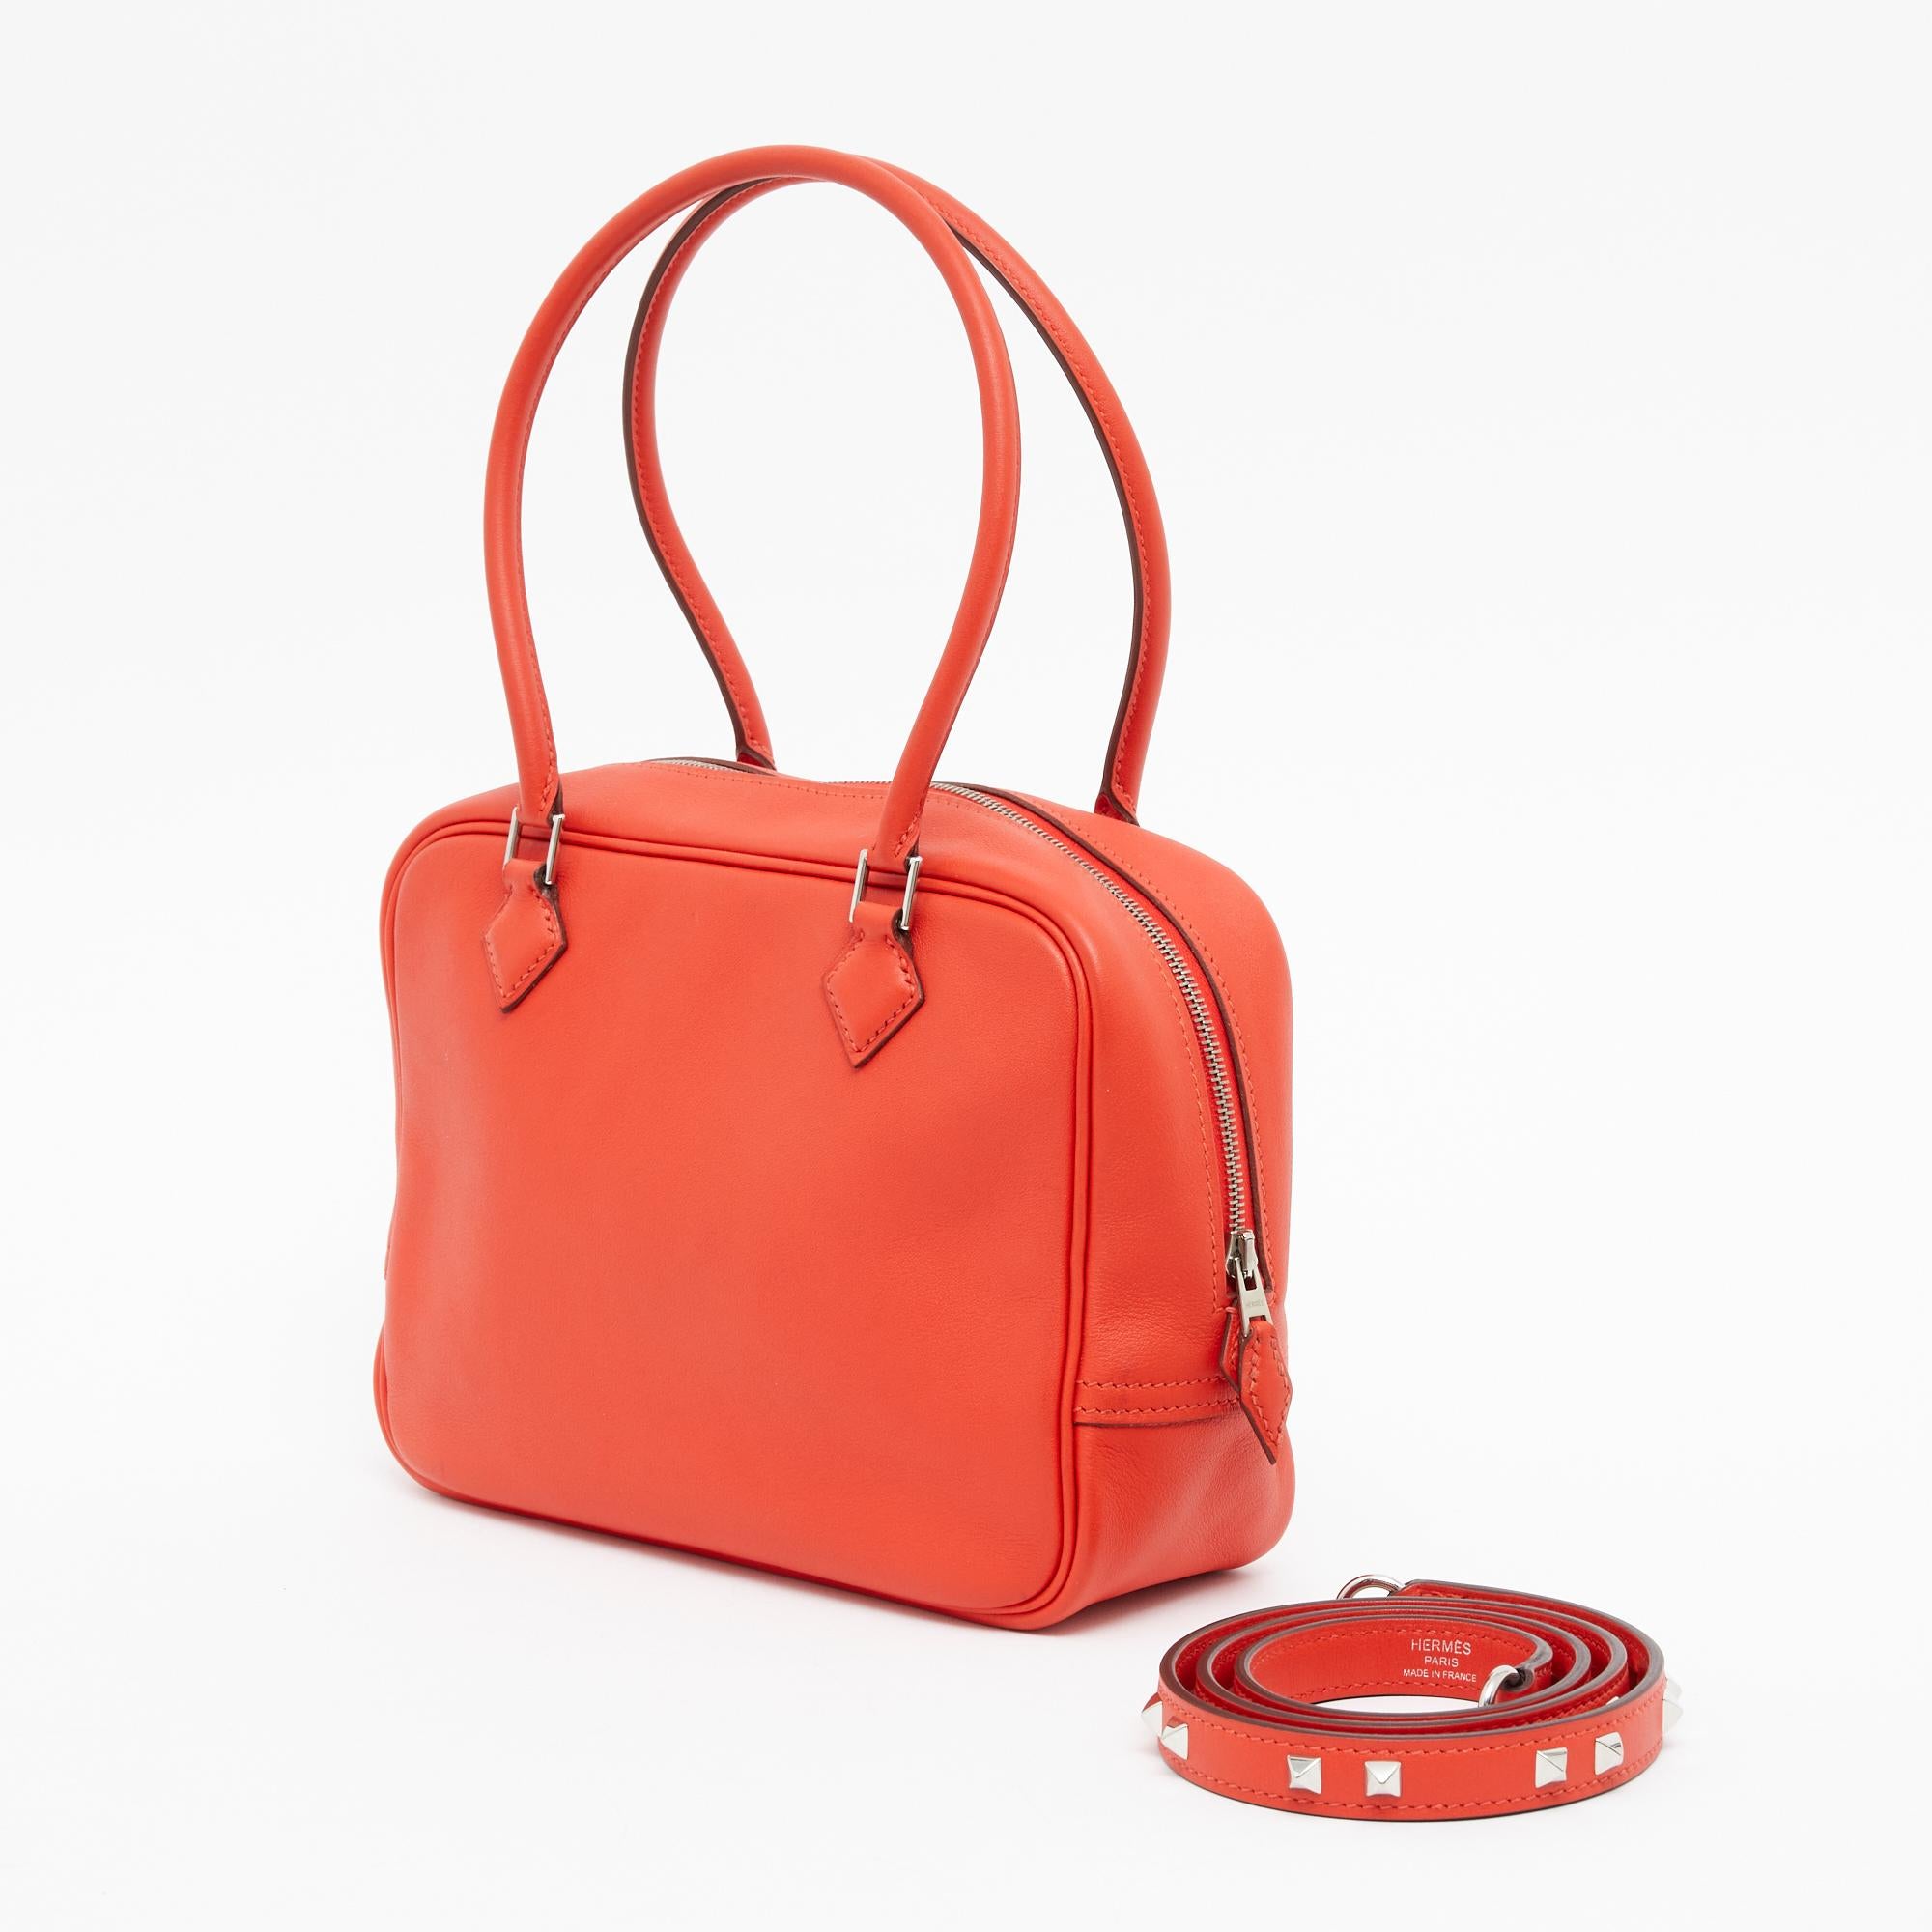 Hermès bag model Plume TPM format in Swift leather color Capucine, i.e. a very bright red orange, silver-colored metalwork, interior in coordinated leather and shoulder strap Mini Dog model in coordinated leather and metalwork (purchased in July